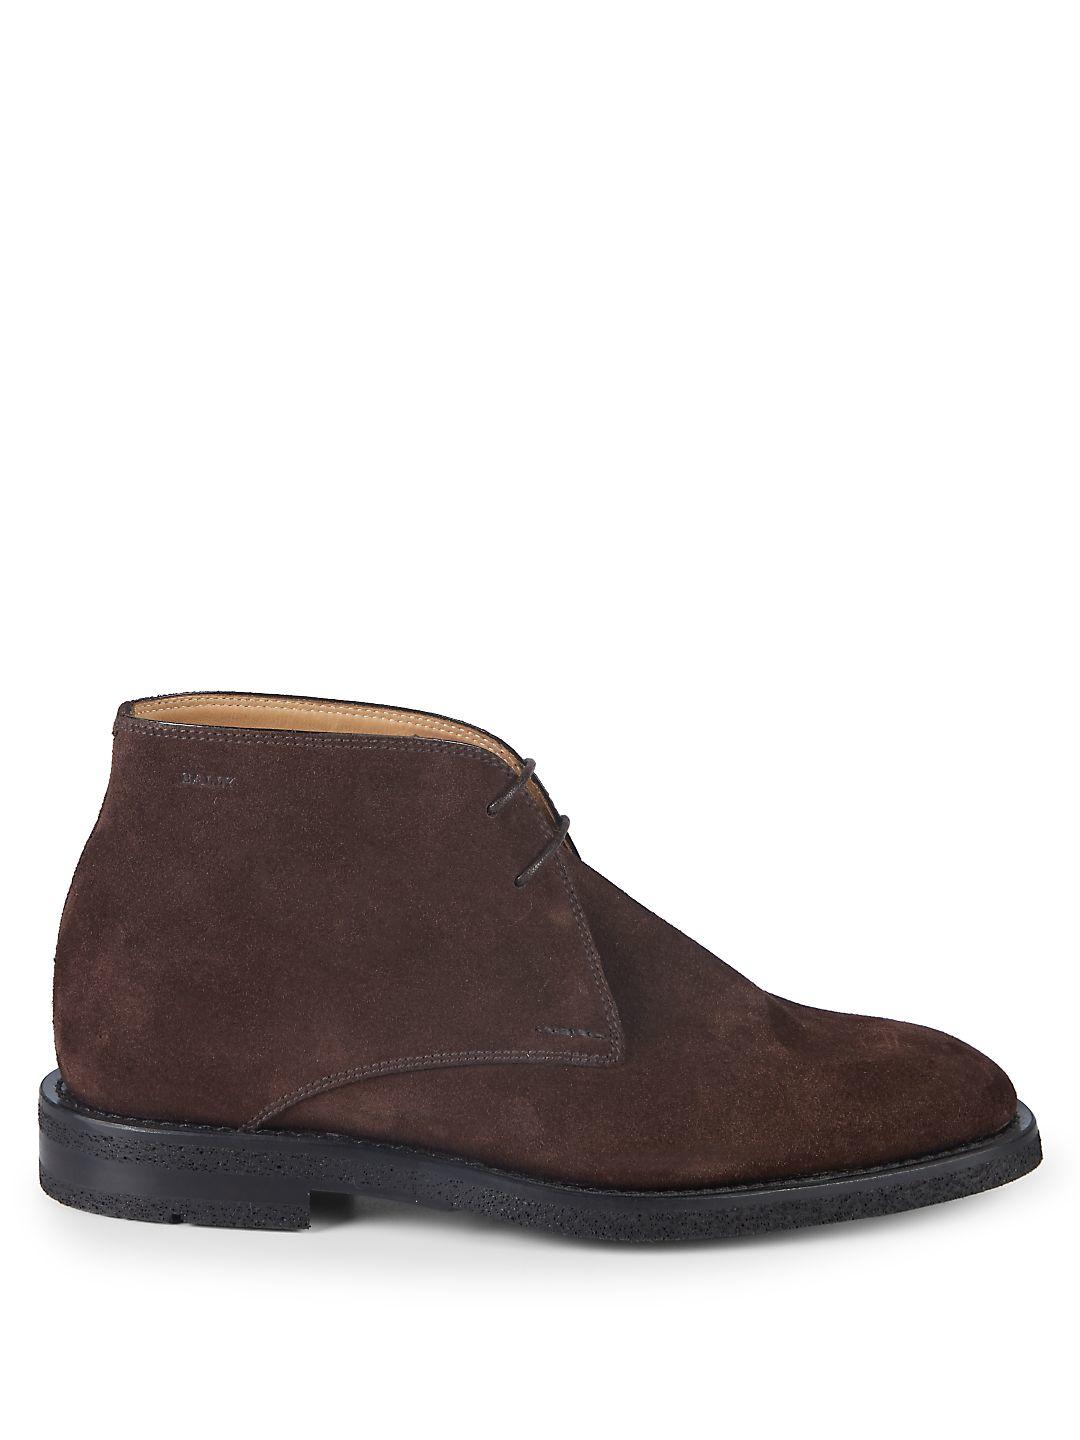 Bally Rhimar Suede Chukka Boots in Chocolate (Brown) for Men - Lyst